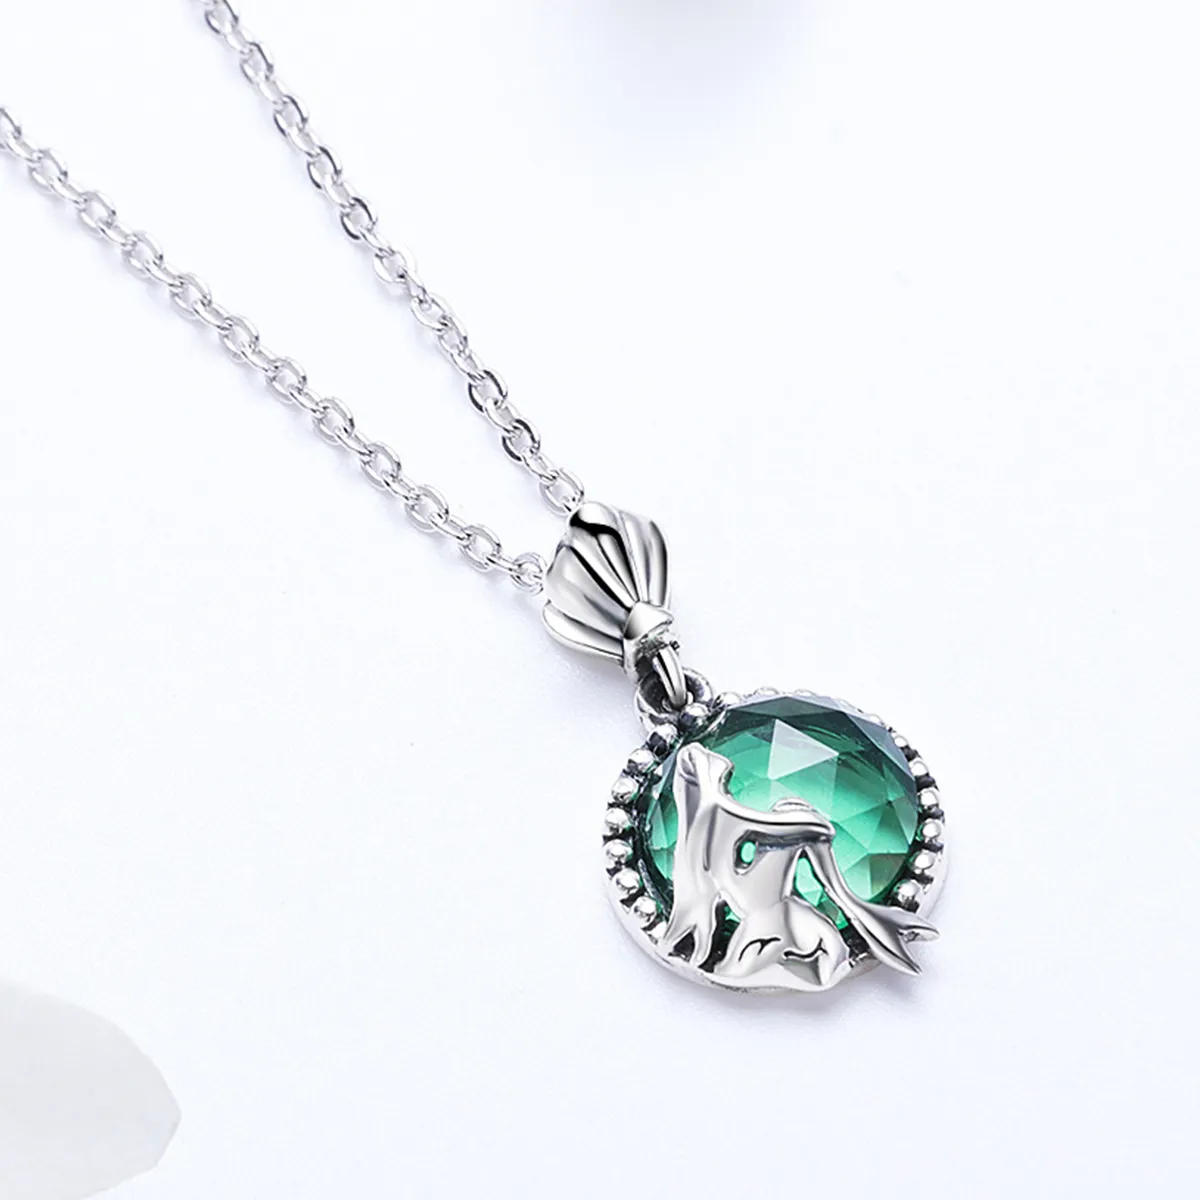 Pandora Style Silver Love of Mermaid Necklace - SCN262